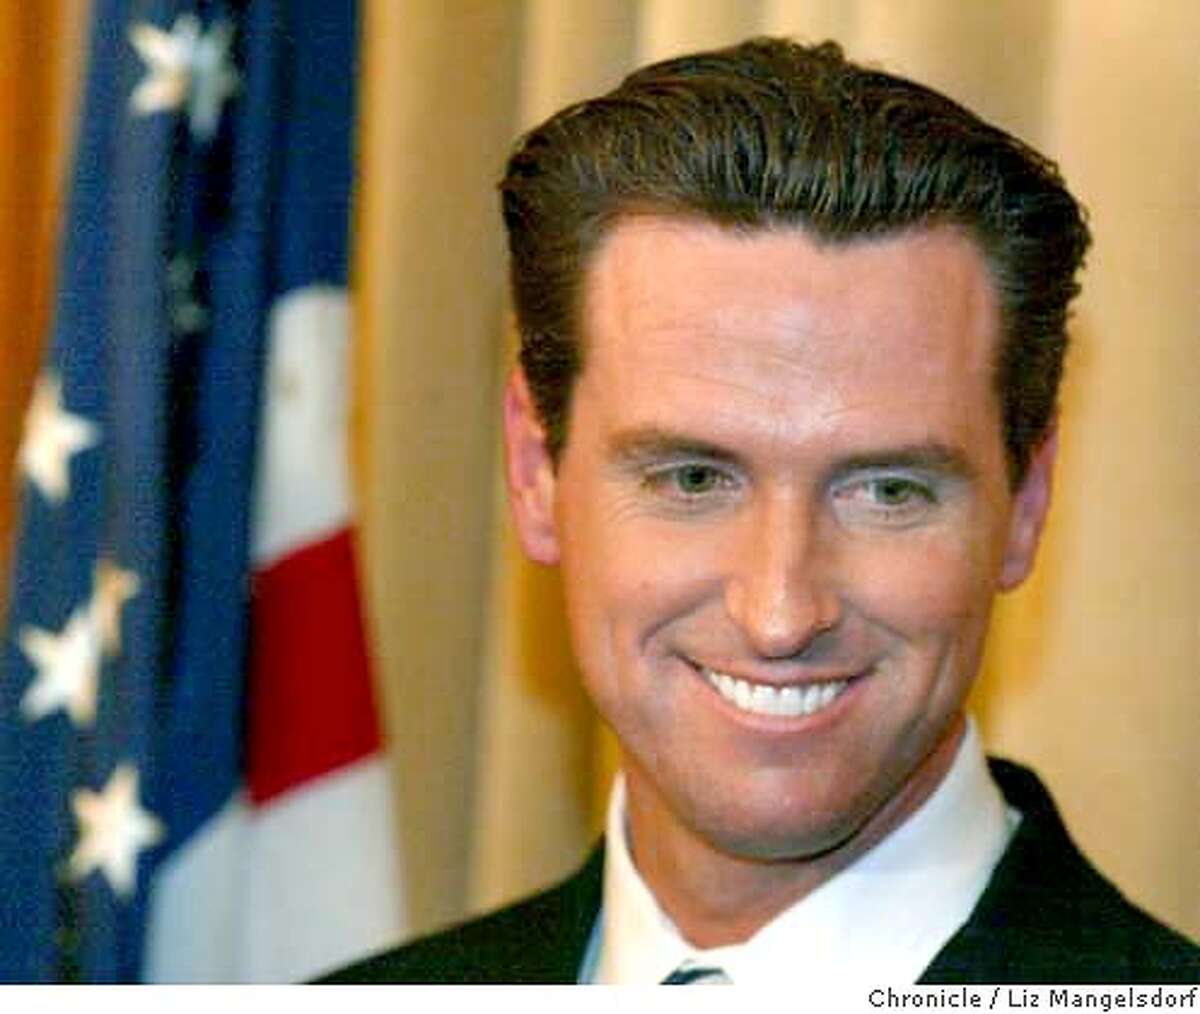 The Battle Over Same Sex Marriage Uncharted Territory Bush S Stance Led Newsom To Take Action